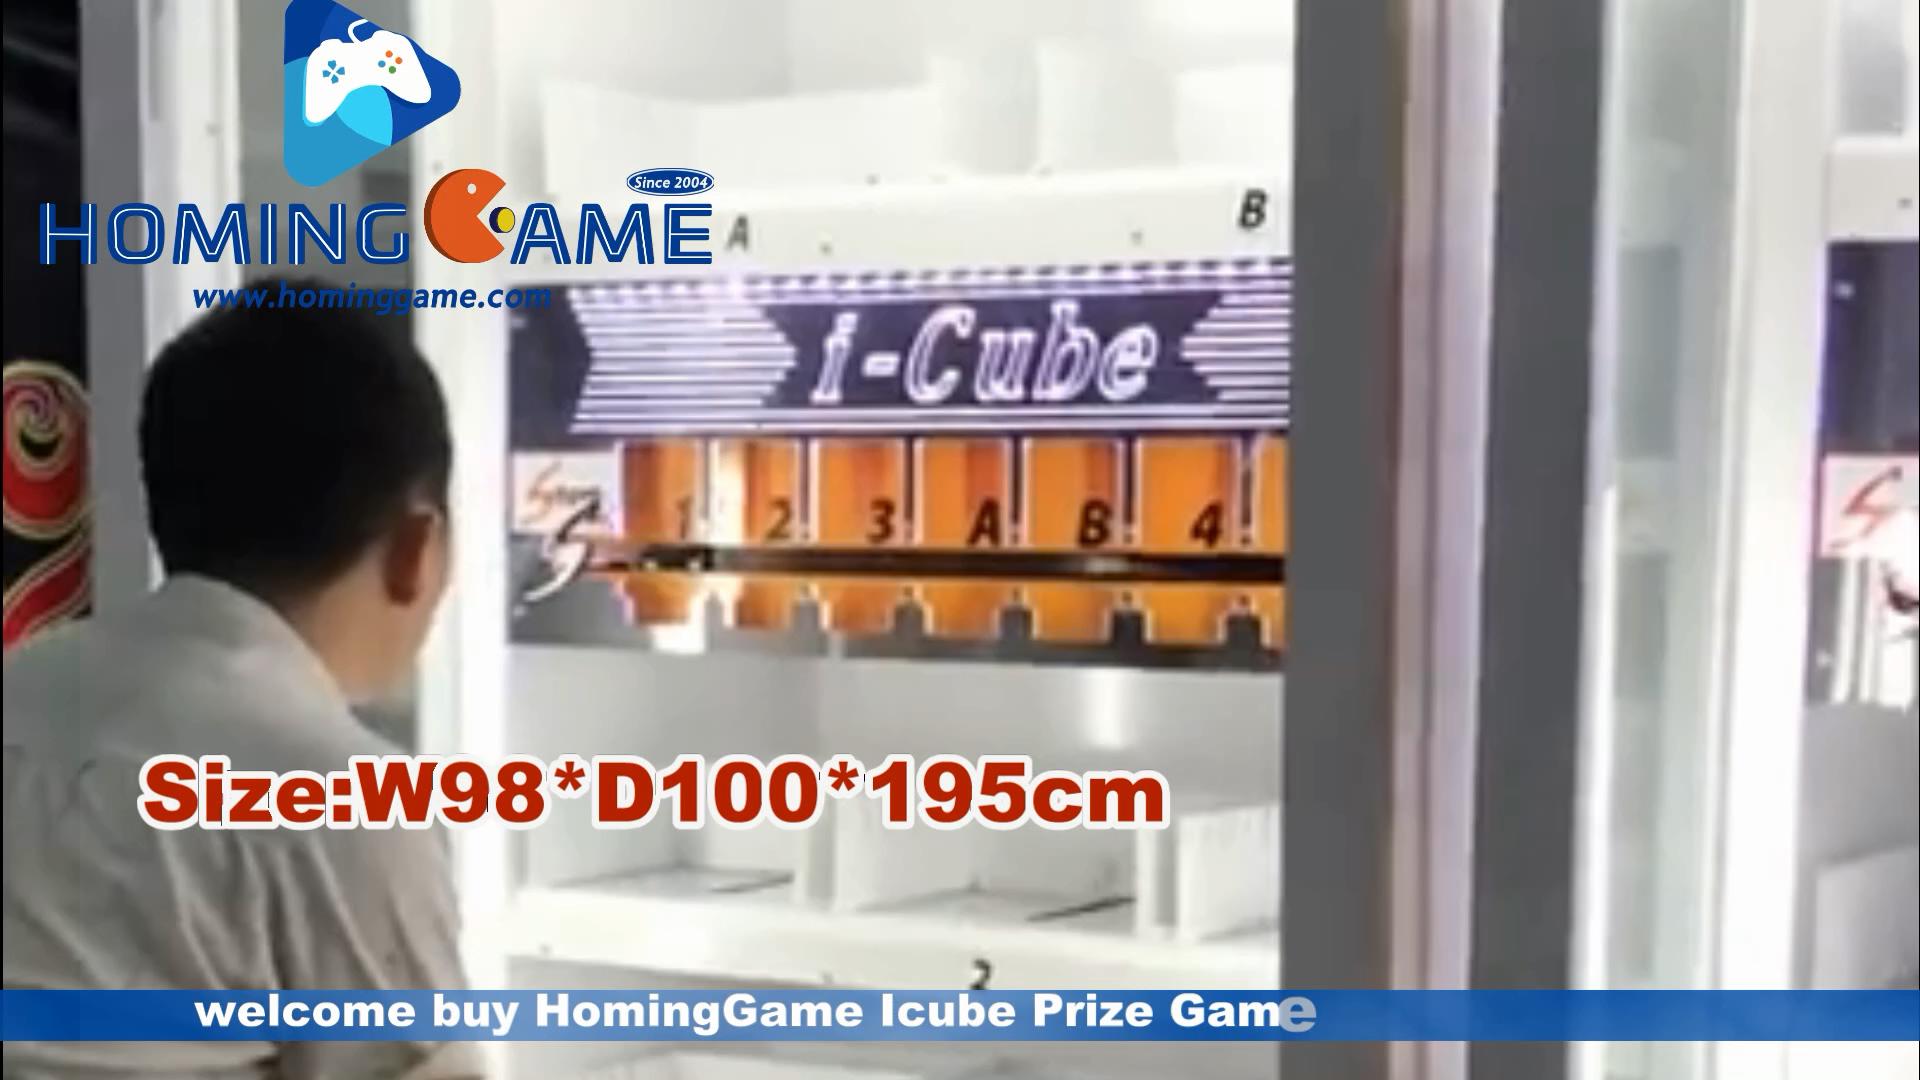 s-cube prize game machine,s cube,icube prize game machine,icube prize redemption game machine,s-cube redemption game machine,s-cube arcade game machine,game machine,arcade game machine,coin operated game machine,indoor game machine,amusement park game equipment,game equipment,slot game machine,electrical game machine,coin operated prize game machine,vending machine,prize vending machine,redemption machine,dispenser machine,coin games,key master game machine,winner cube prize,winner cub e prize game machine,hominggame,www.hominggame.com,gametube.hk,www.gametube.hk,hominggame prize game,hominggame s-cube prize game machine,scissor cut prize game machine,barber cut prize game machine,key point push prize game machine,key push prize game,push prize game machine,push a win prize game machine,stacker prize game machine,shopping mall prize game machine,axe master prize game machine,magic arrow prize game machine,arrow prize game machine,crane machine,claw game machine,claw prize game machine,crane claw machine,vending,diy vending machine,prize machine,entertainment game machine,hominggame icube prize game machine